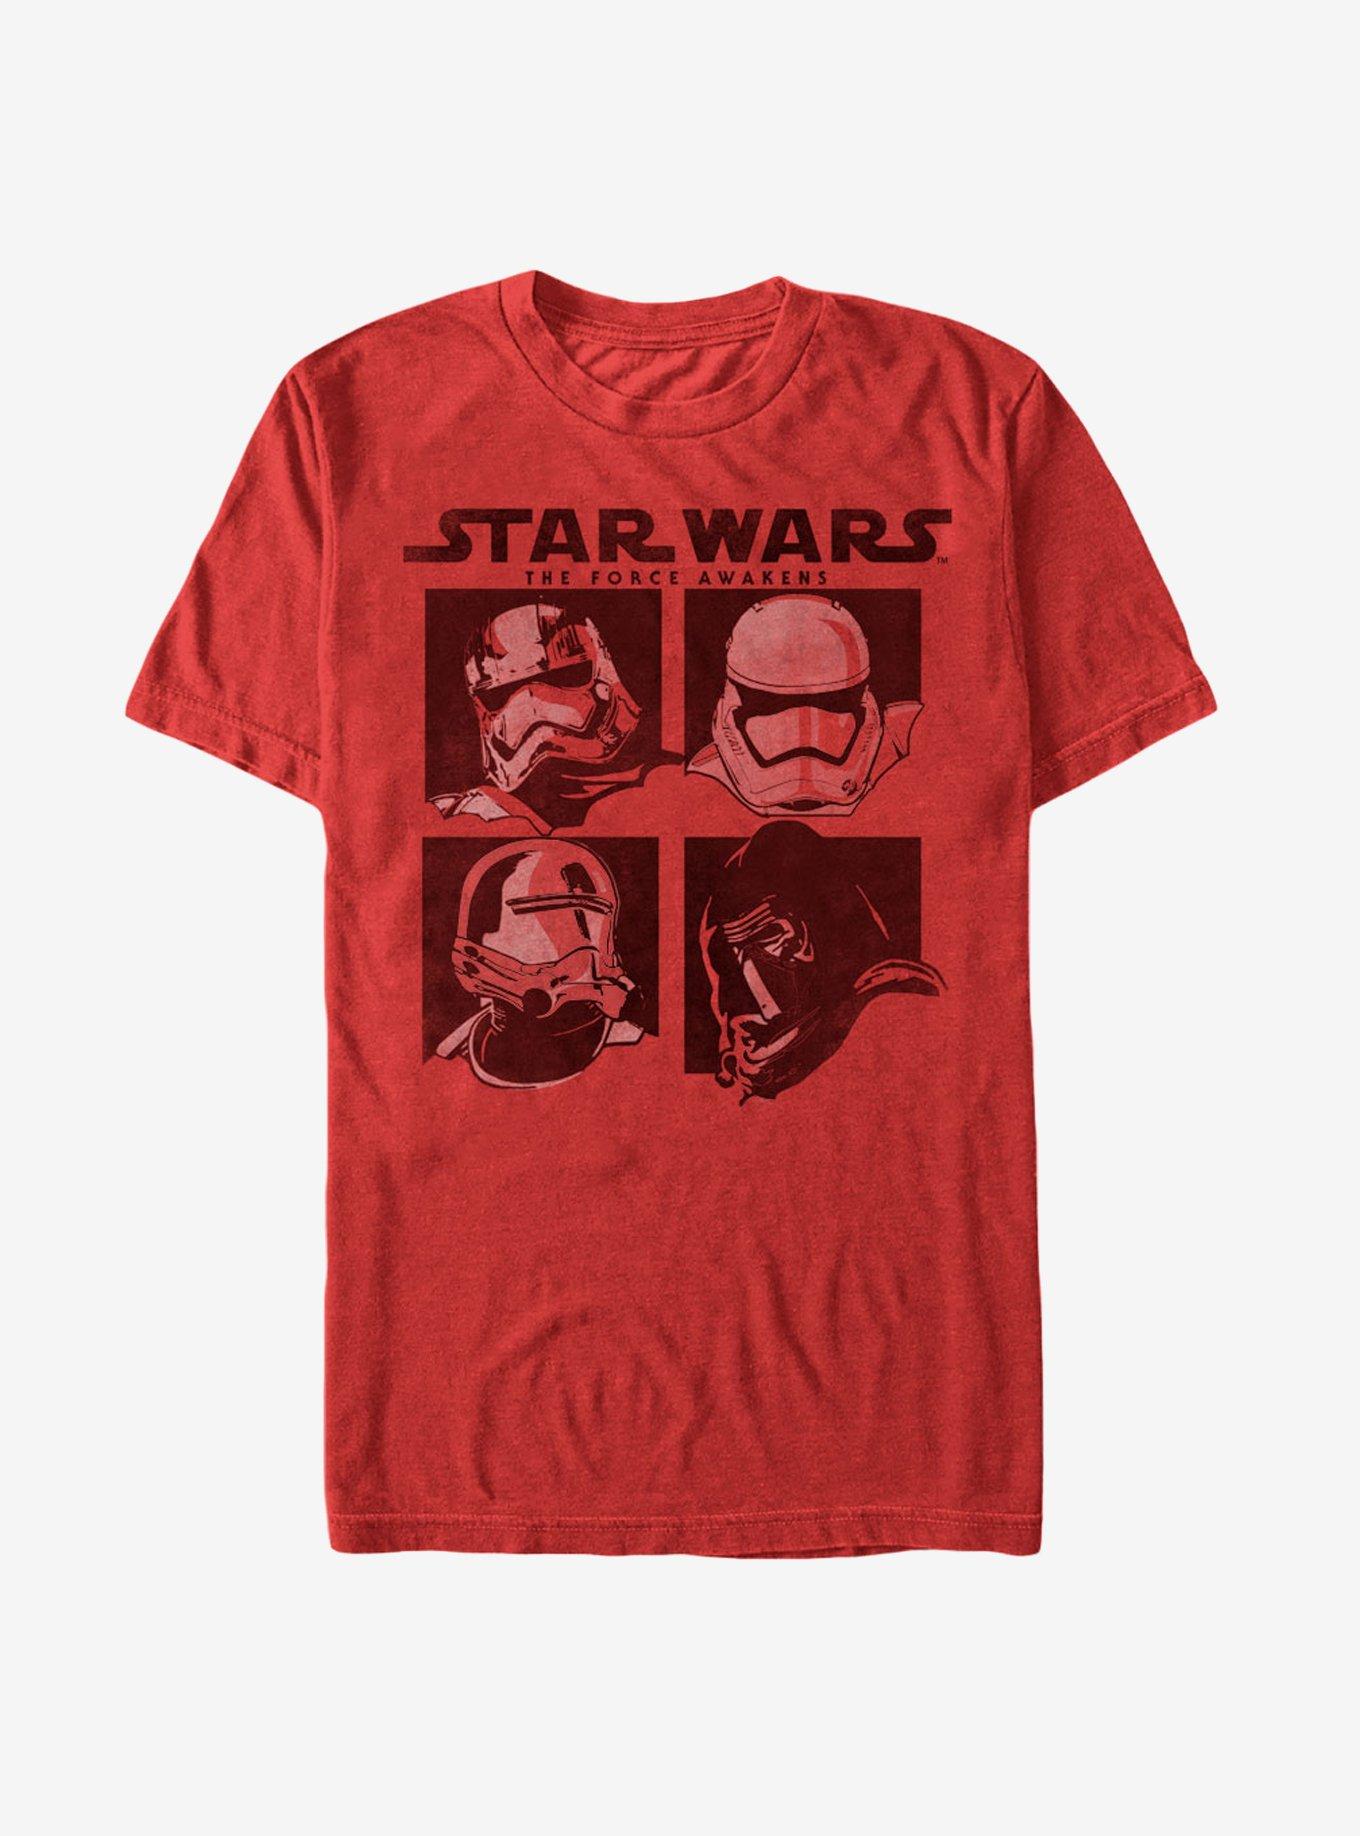 Star Wars The Force Awakens Stormtroopers and Kylo Ren T-Shirt, RED, hi-res